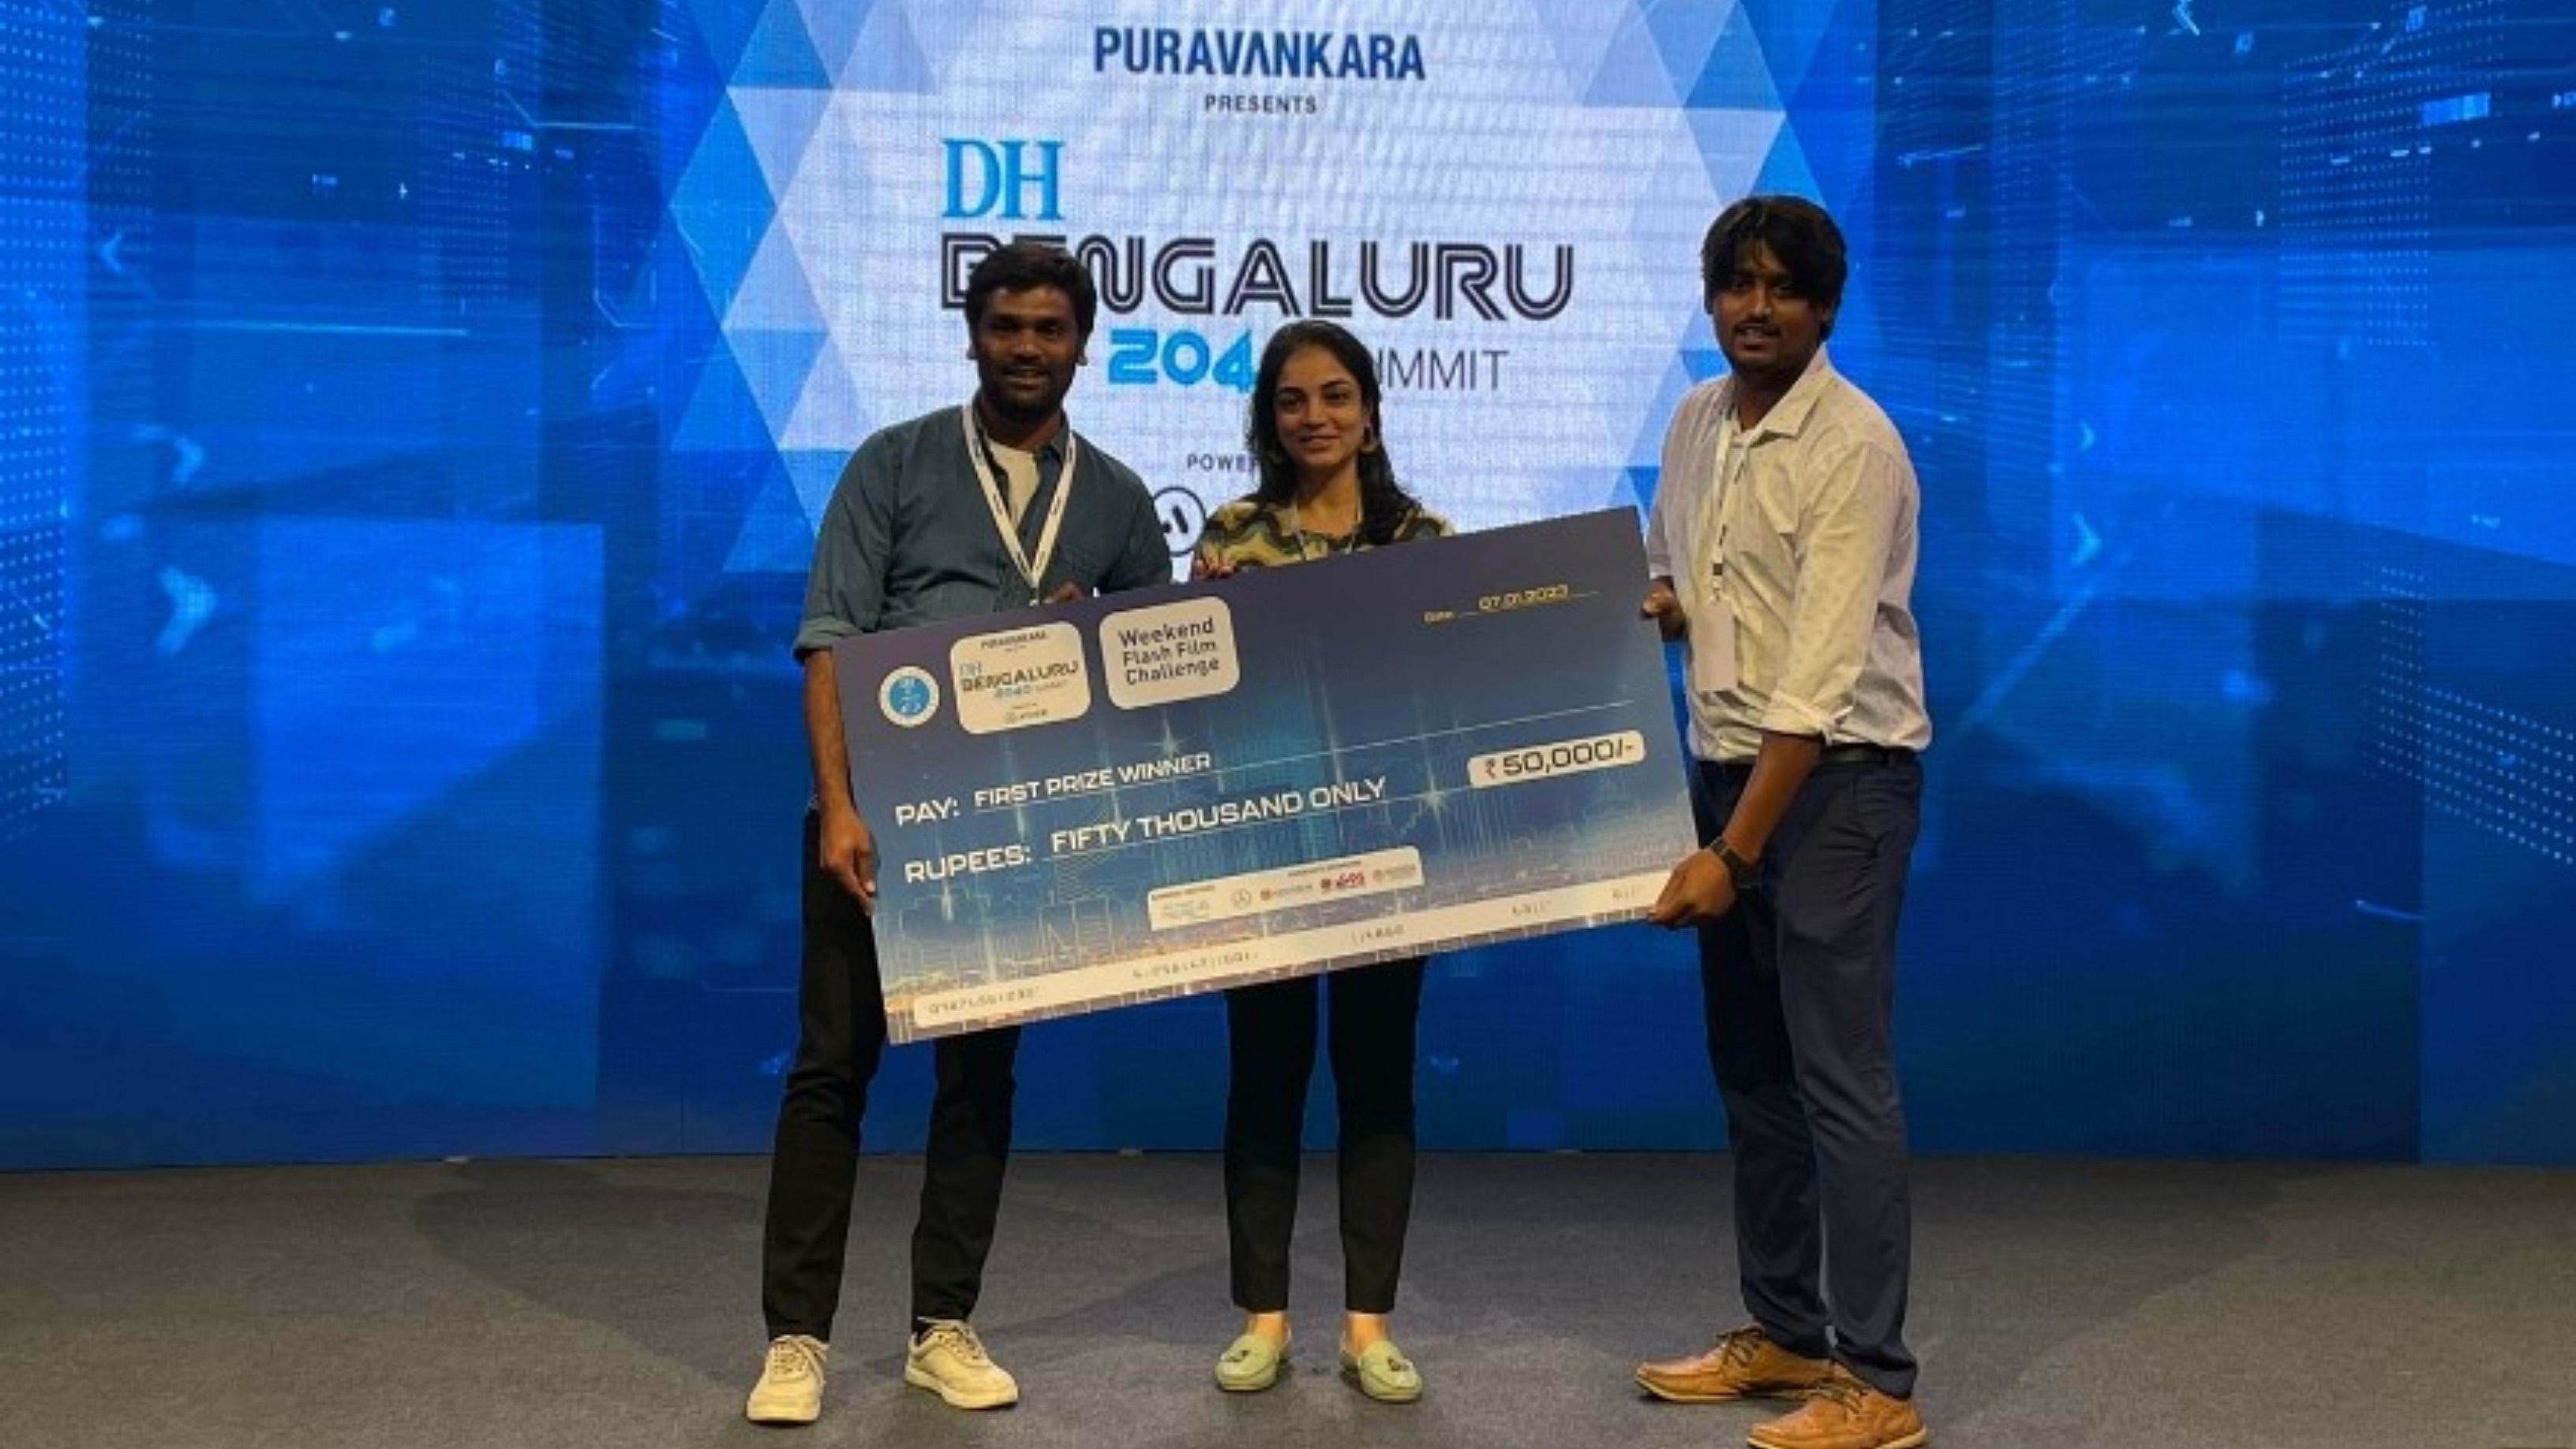 The winning team of 'Ithyartha...? (To resolve)', directed by independent filmmaker Naveen Kempanhalli, received a cash price of Rs 50,000. Credit: DH Photo